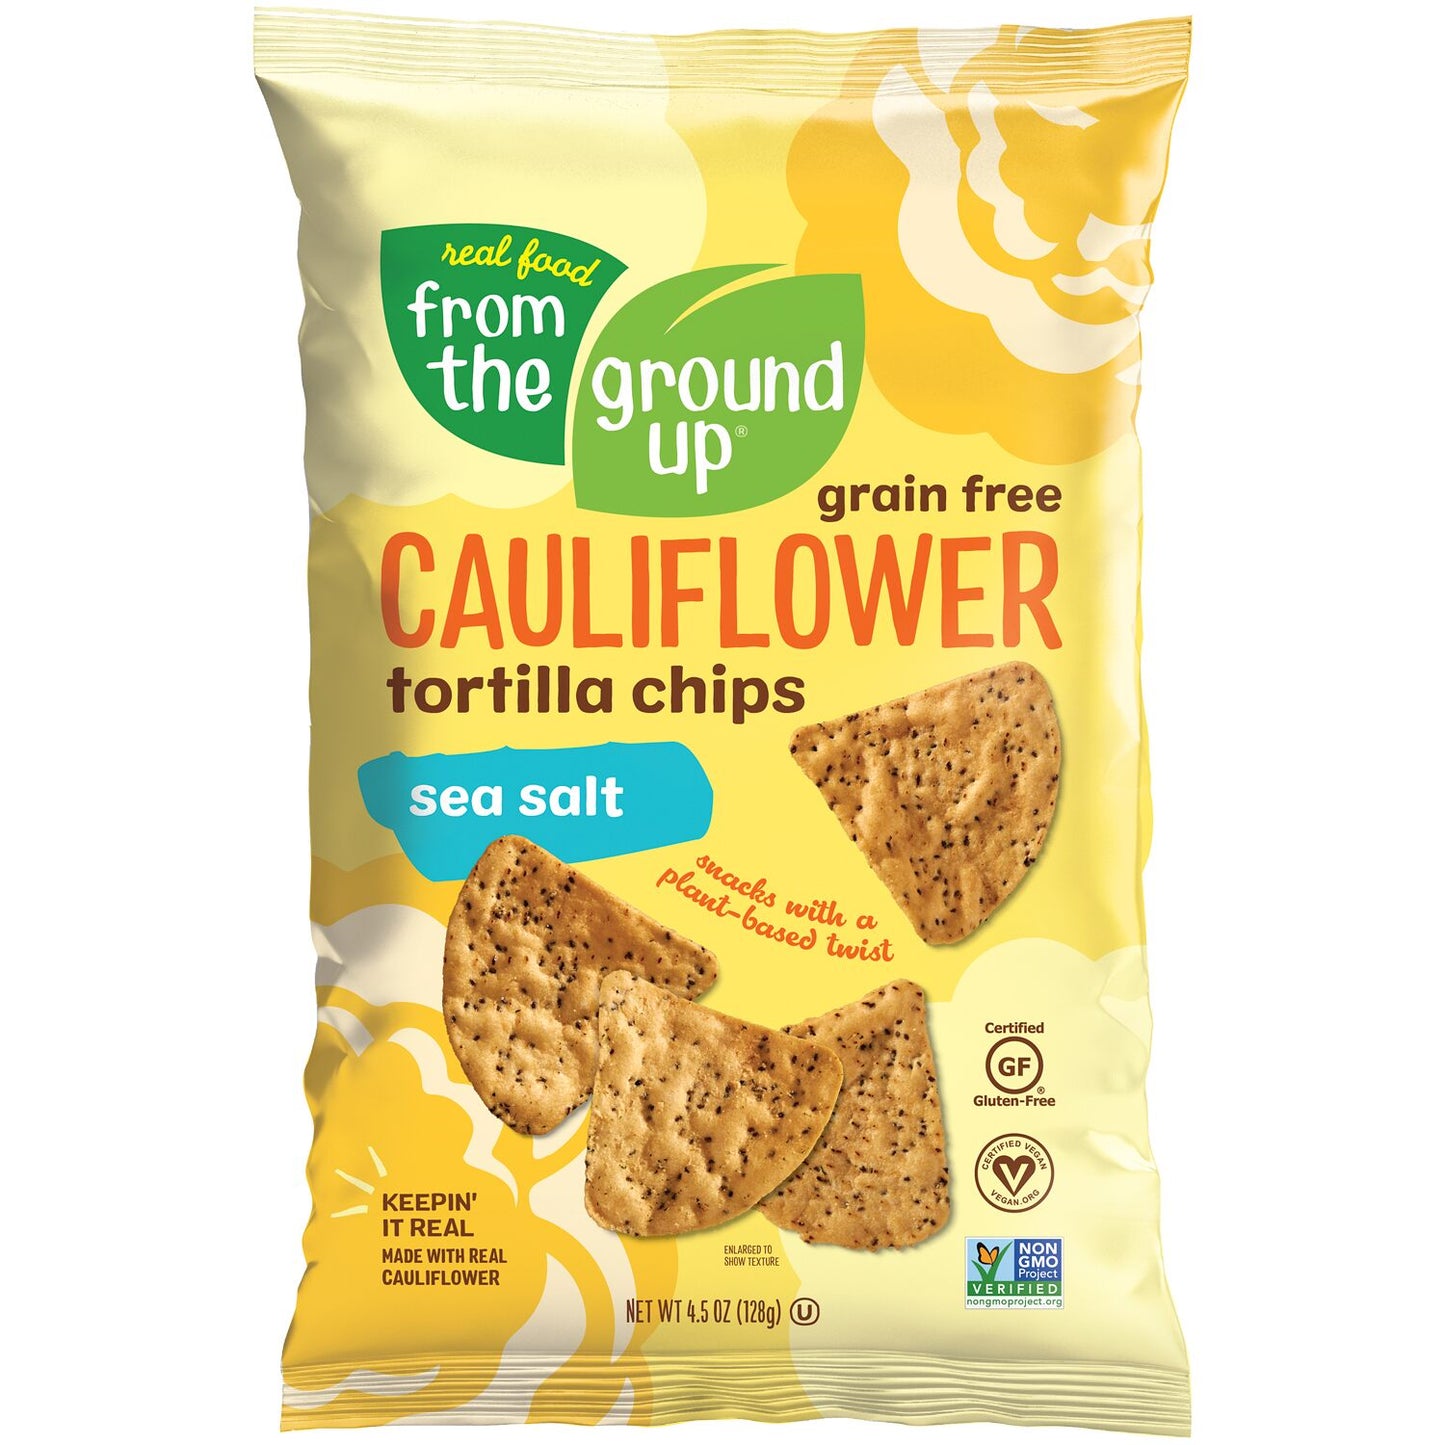 Real Food from the Ground Up Cauliflower Sea Salt Tortilla Chips, 10 oz.